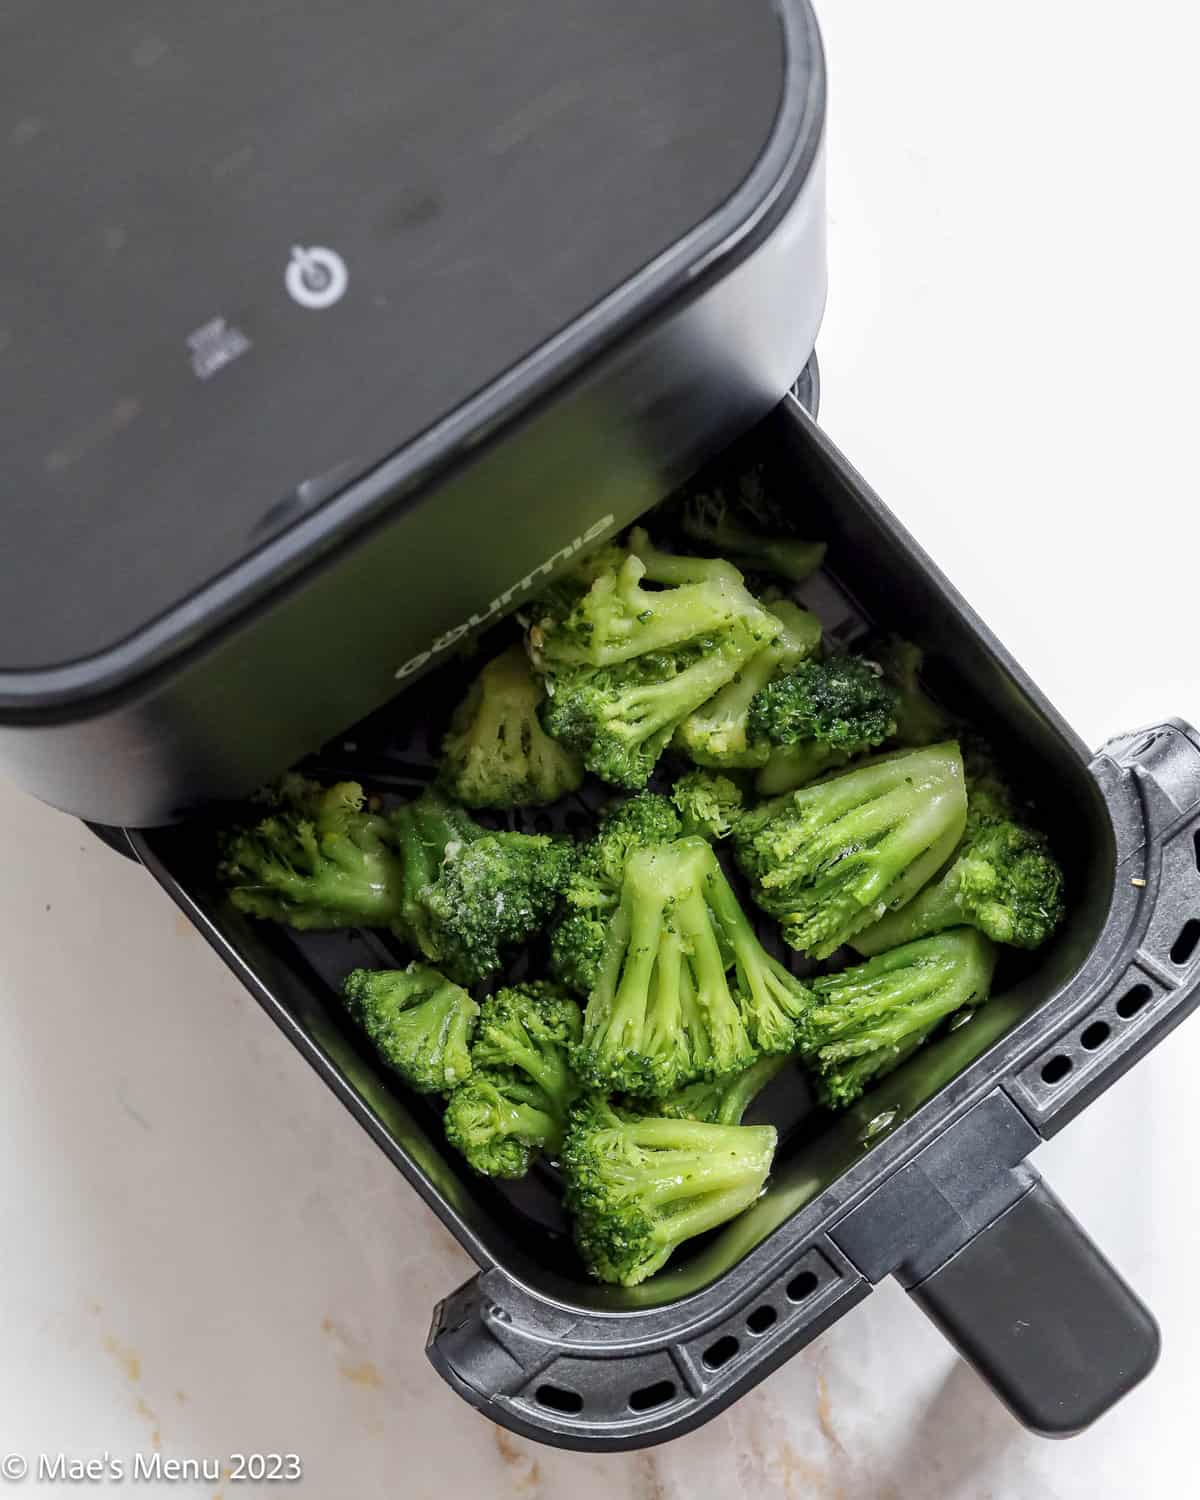 Adding the frozen broccoli to the air fryer.